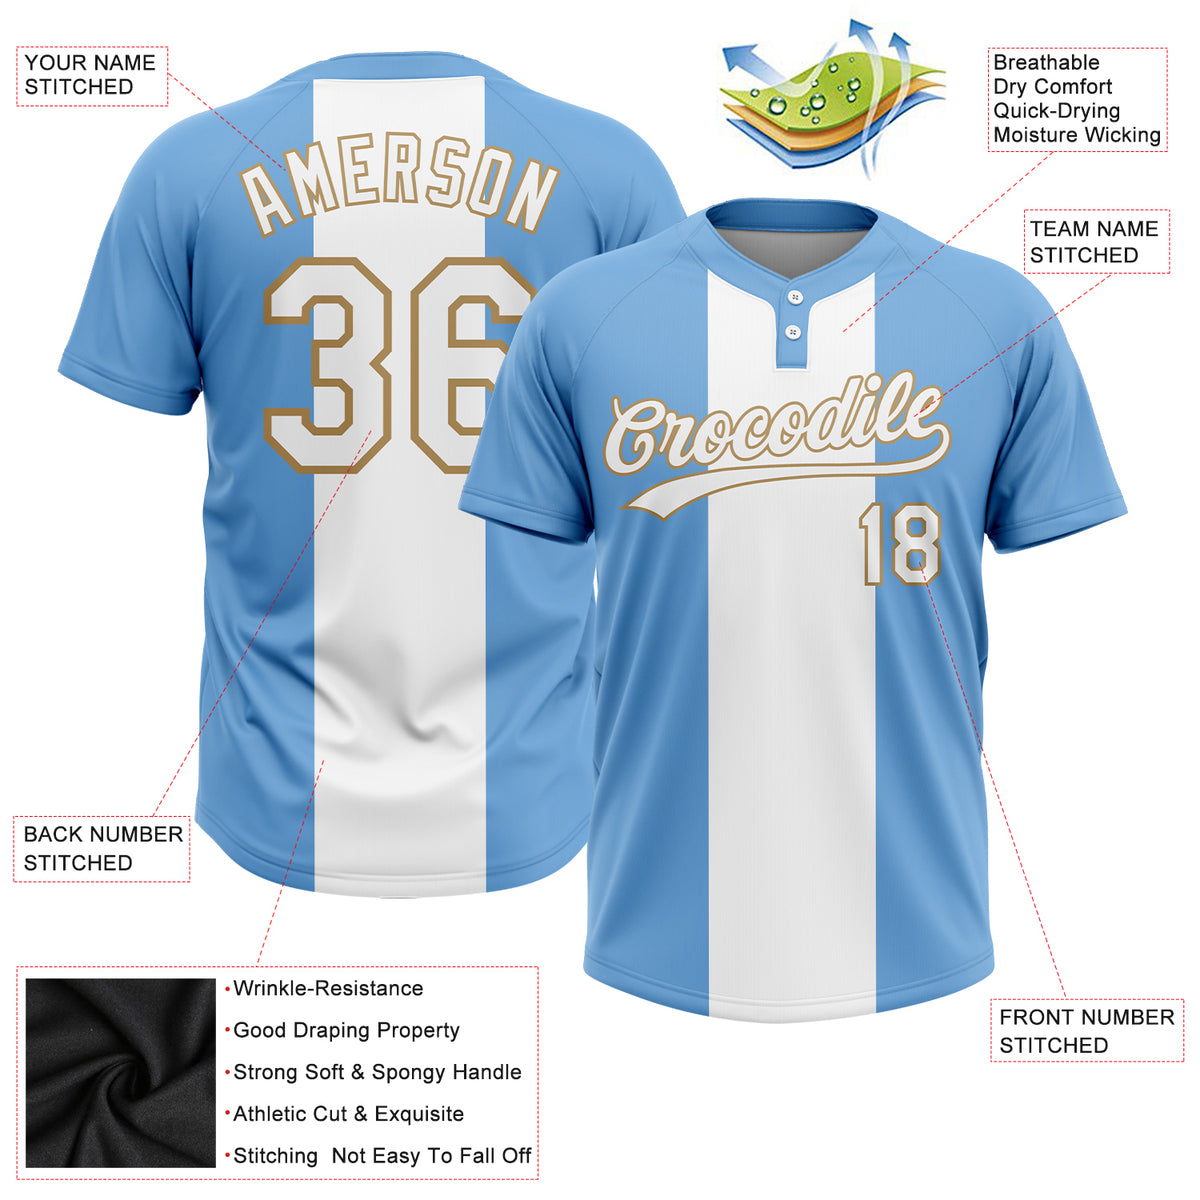  2-Button 2 Color Print Custom Baseball Jersey Adult Small Light  Blue & White : Sports & Outdoors